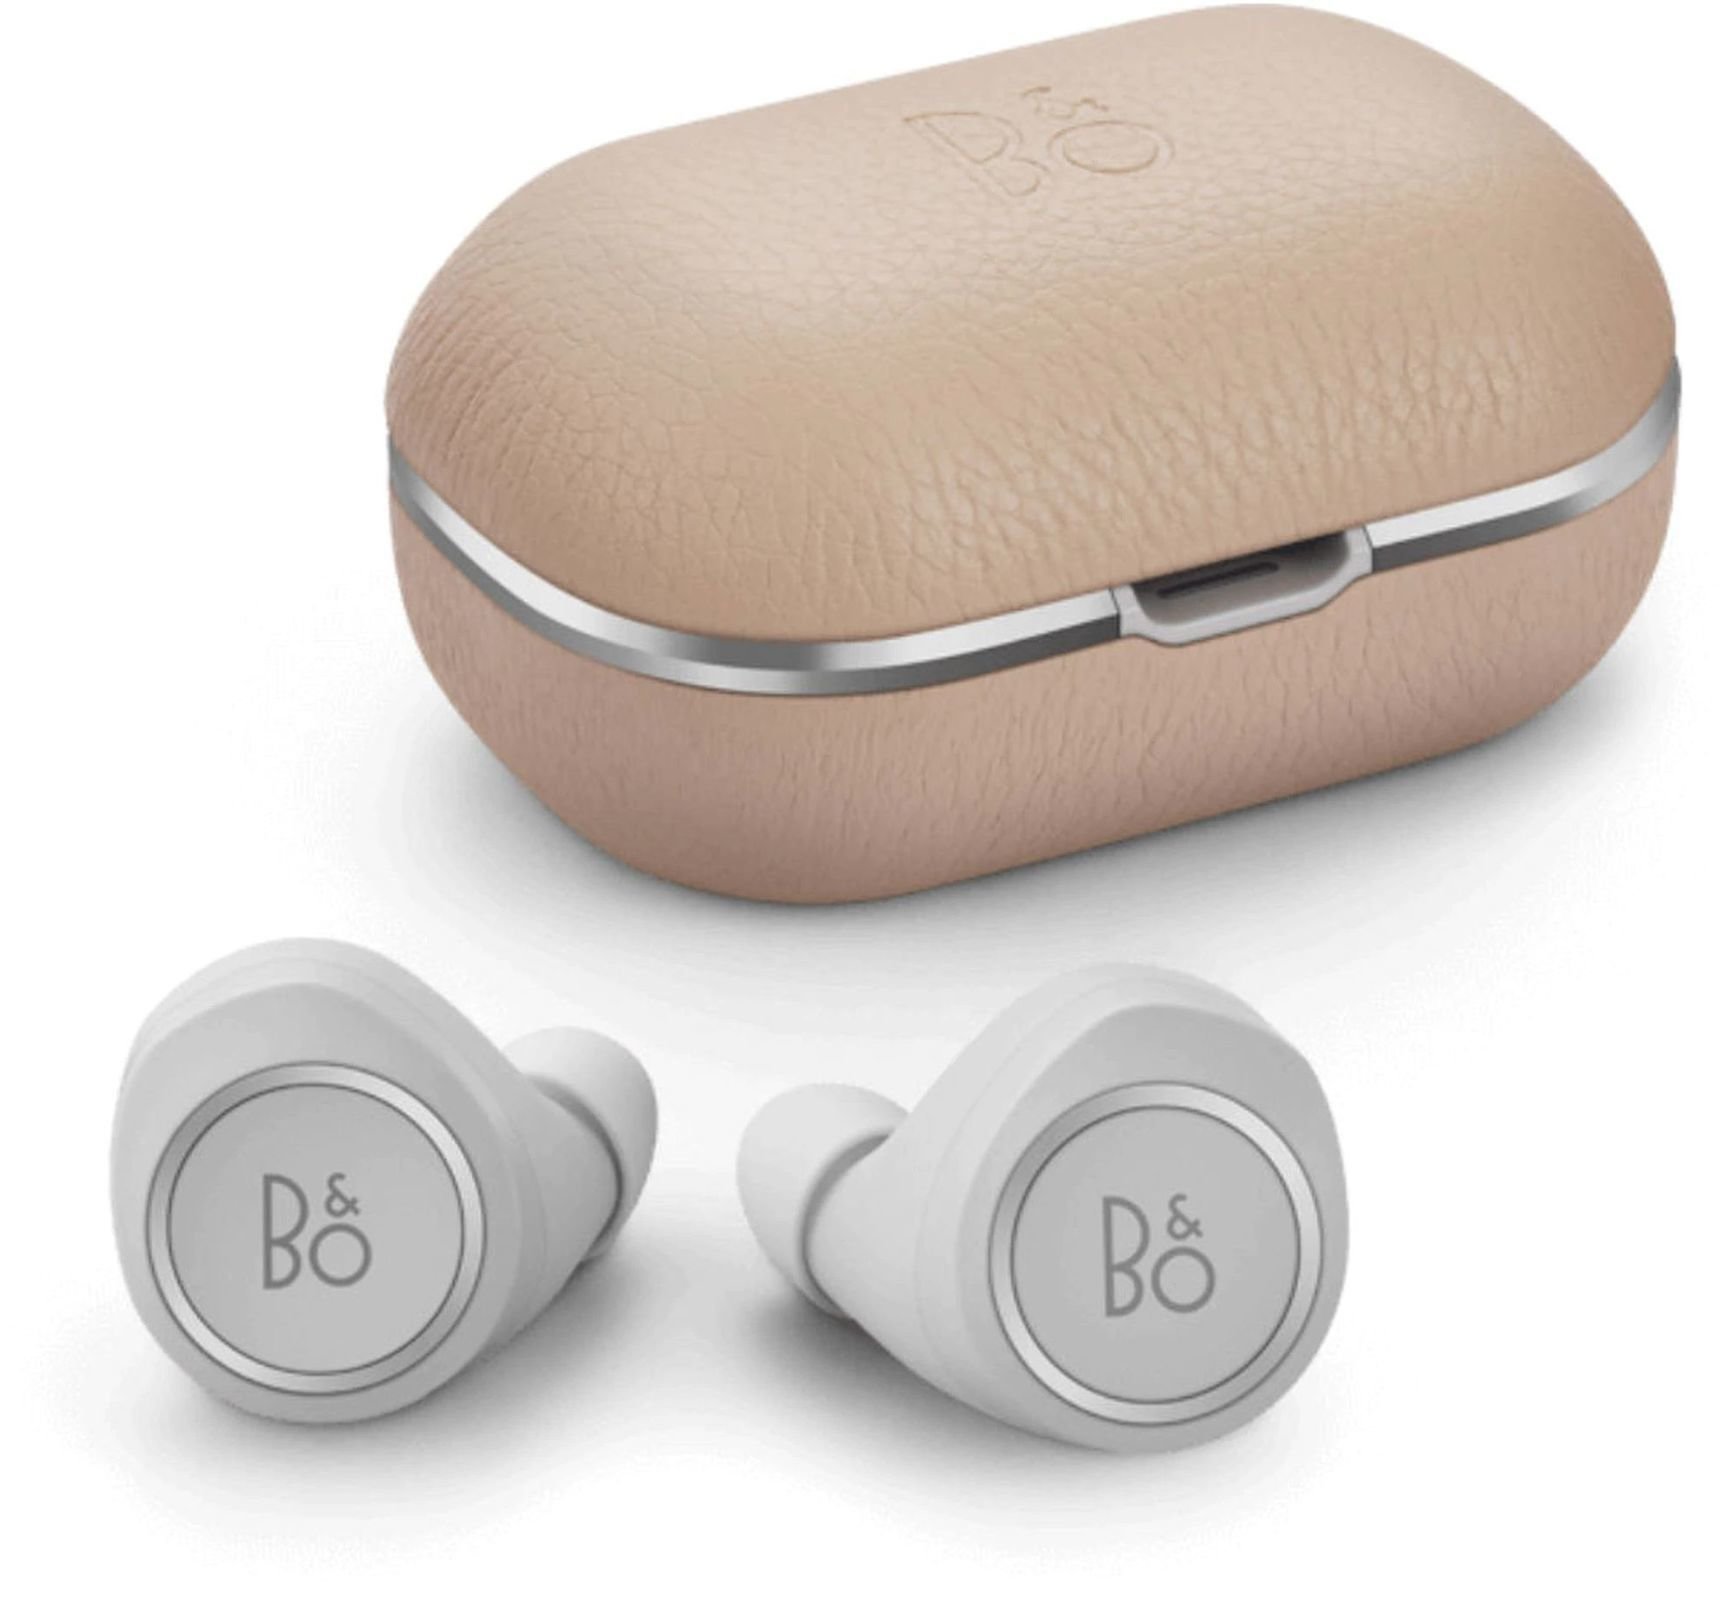 True Wireless In-ear Bang & Olufsen BeoPlay E8 2.0 Natural